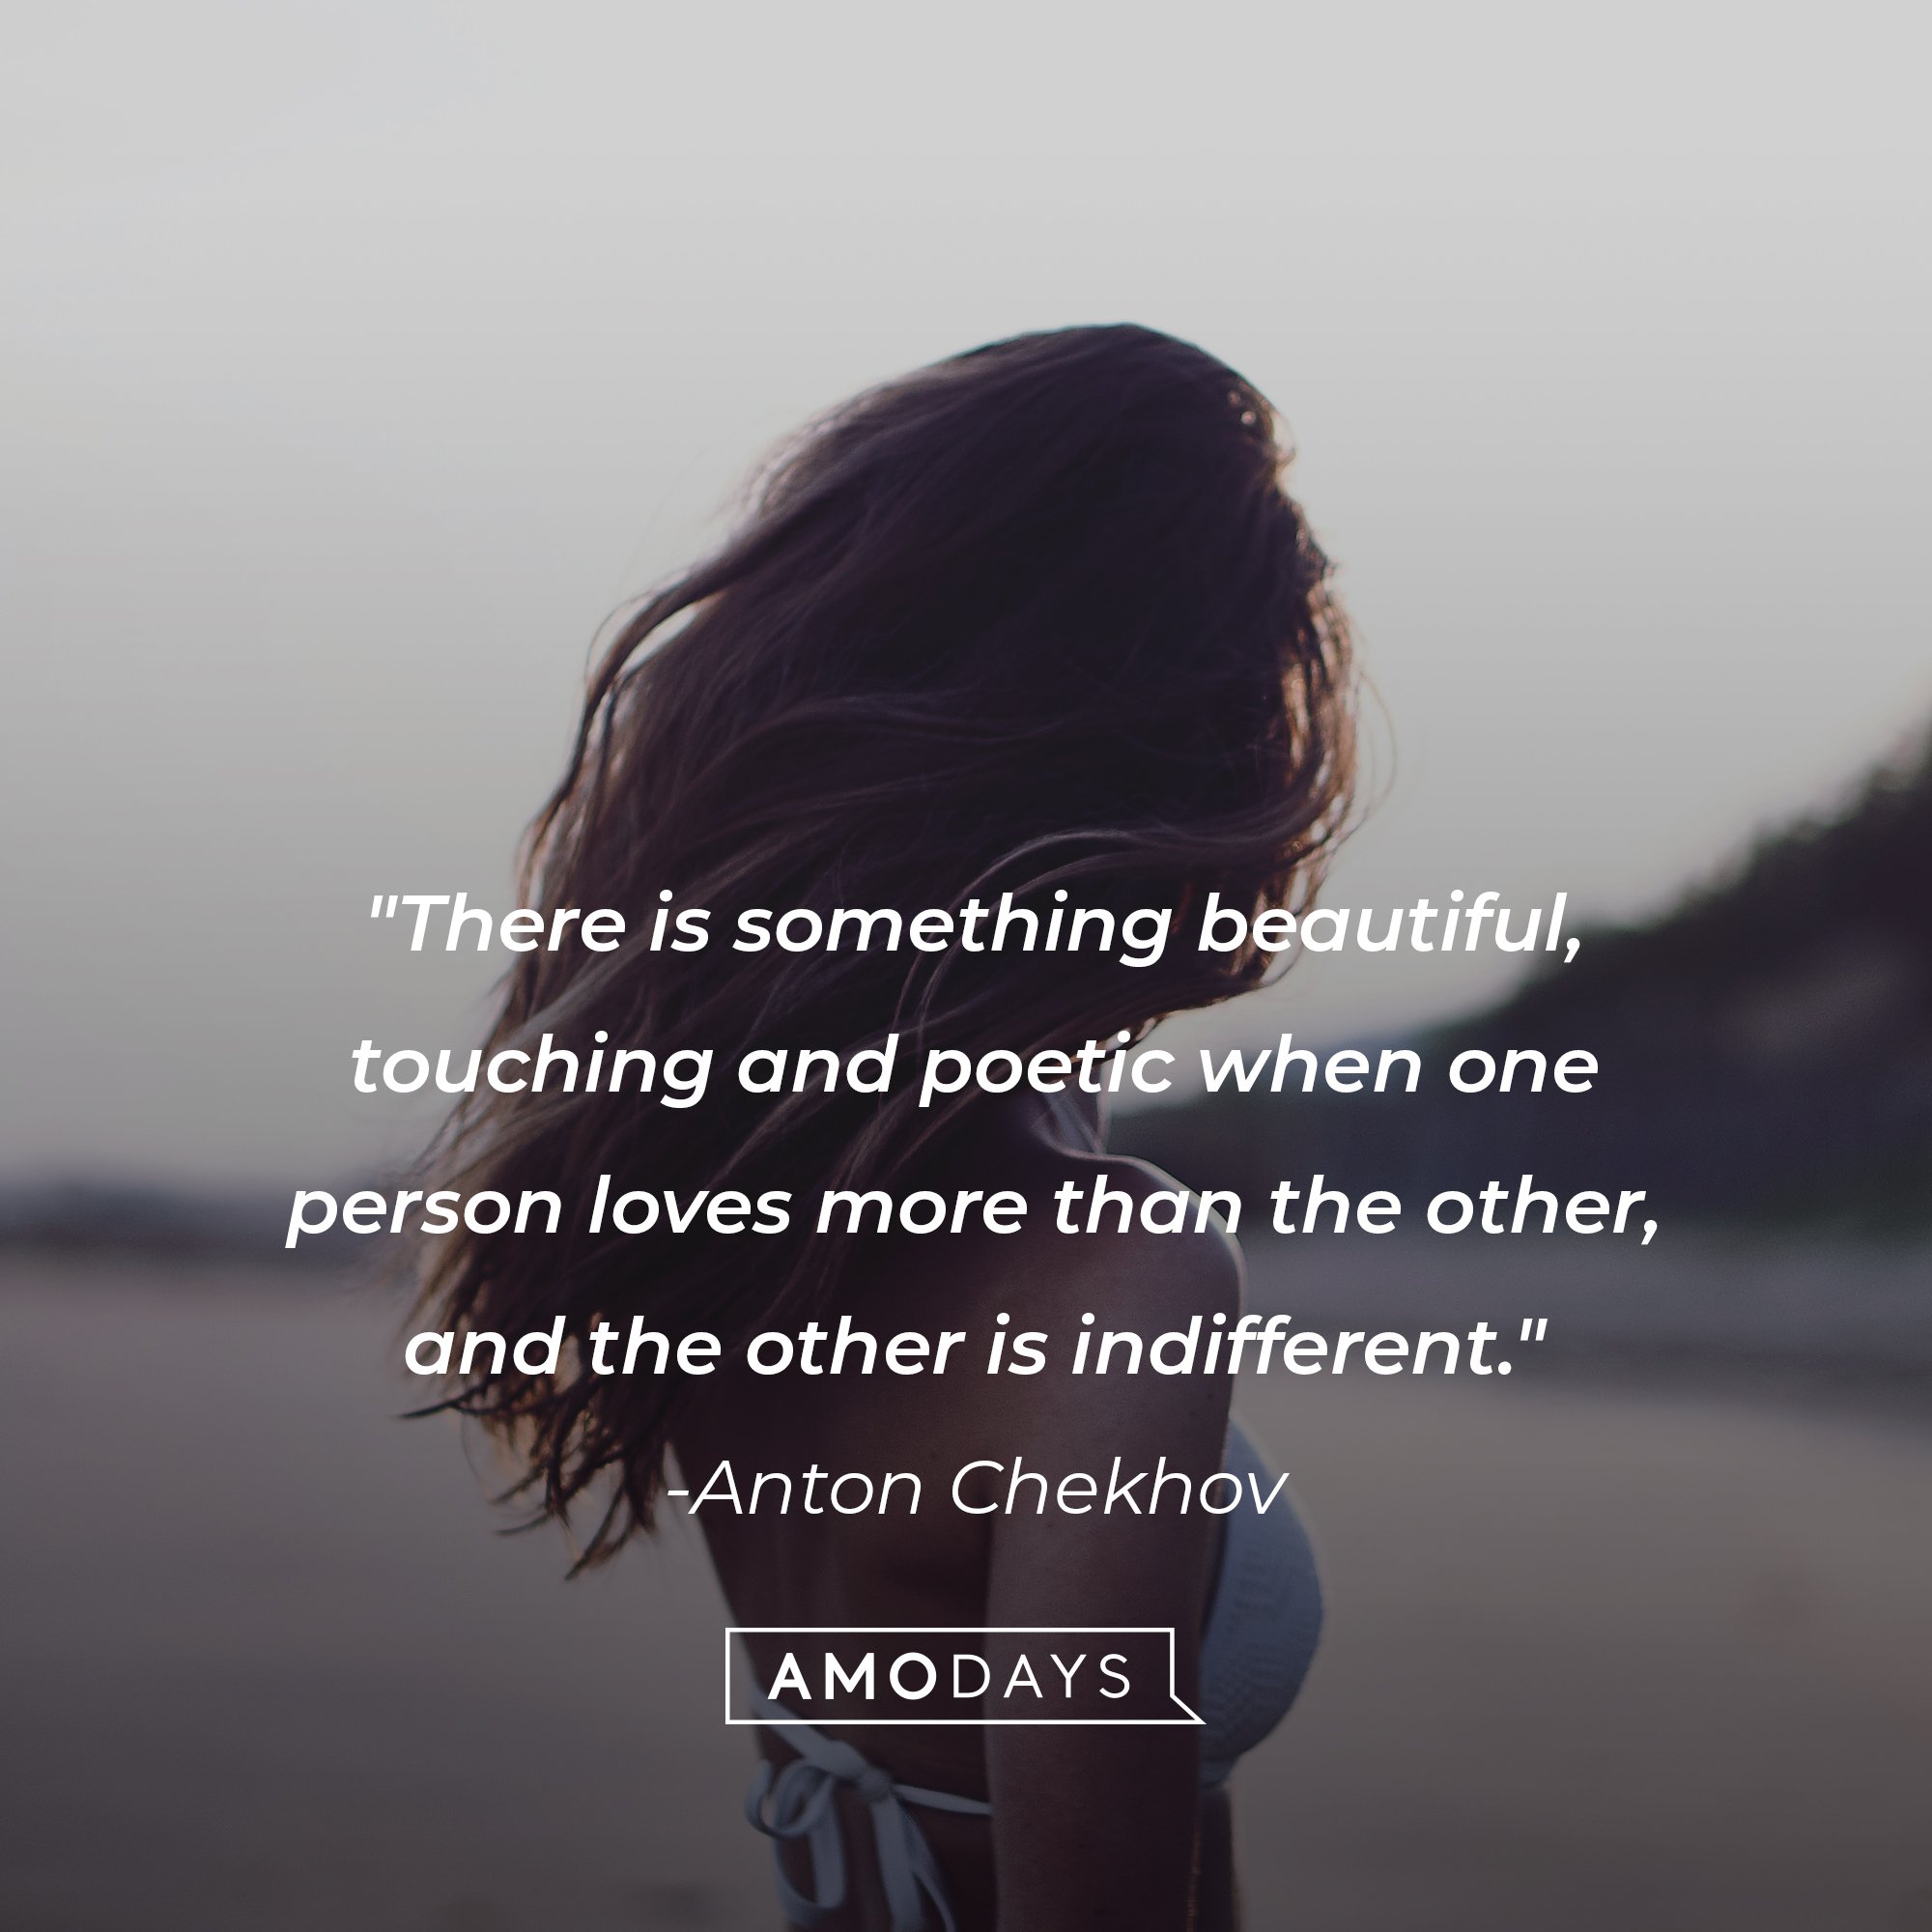 Anton Chekhov's quote: "There is something beautiful, touching and poetic when one person loves more than the other, and the other is indifferent." | Image: AmoDays